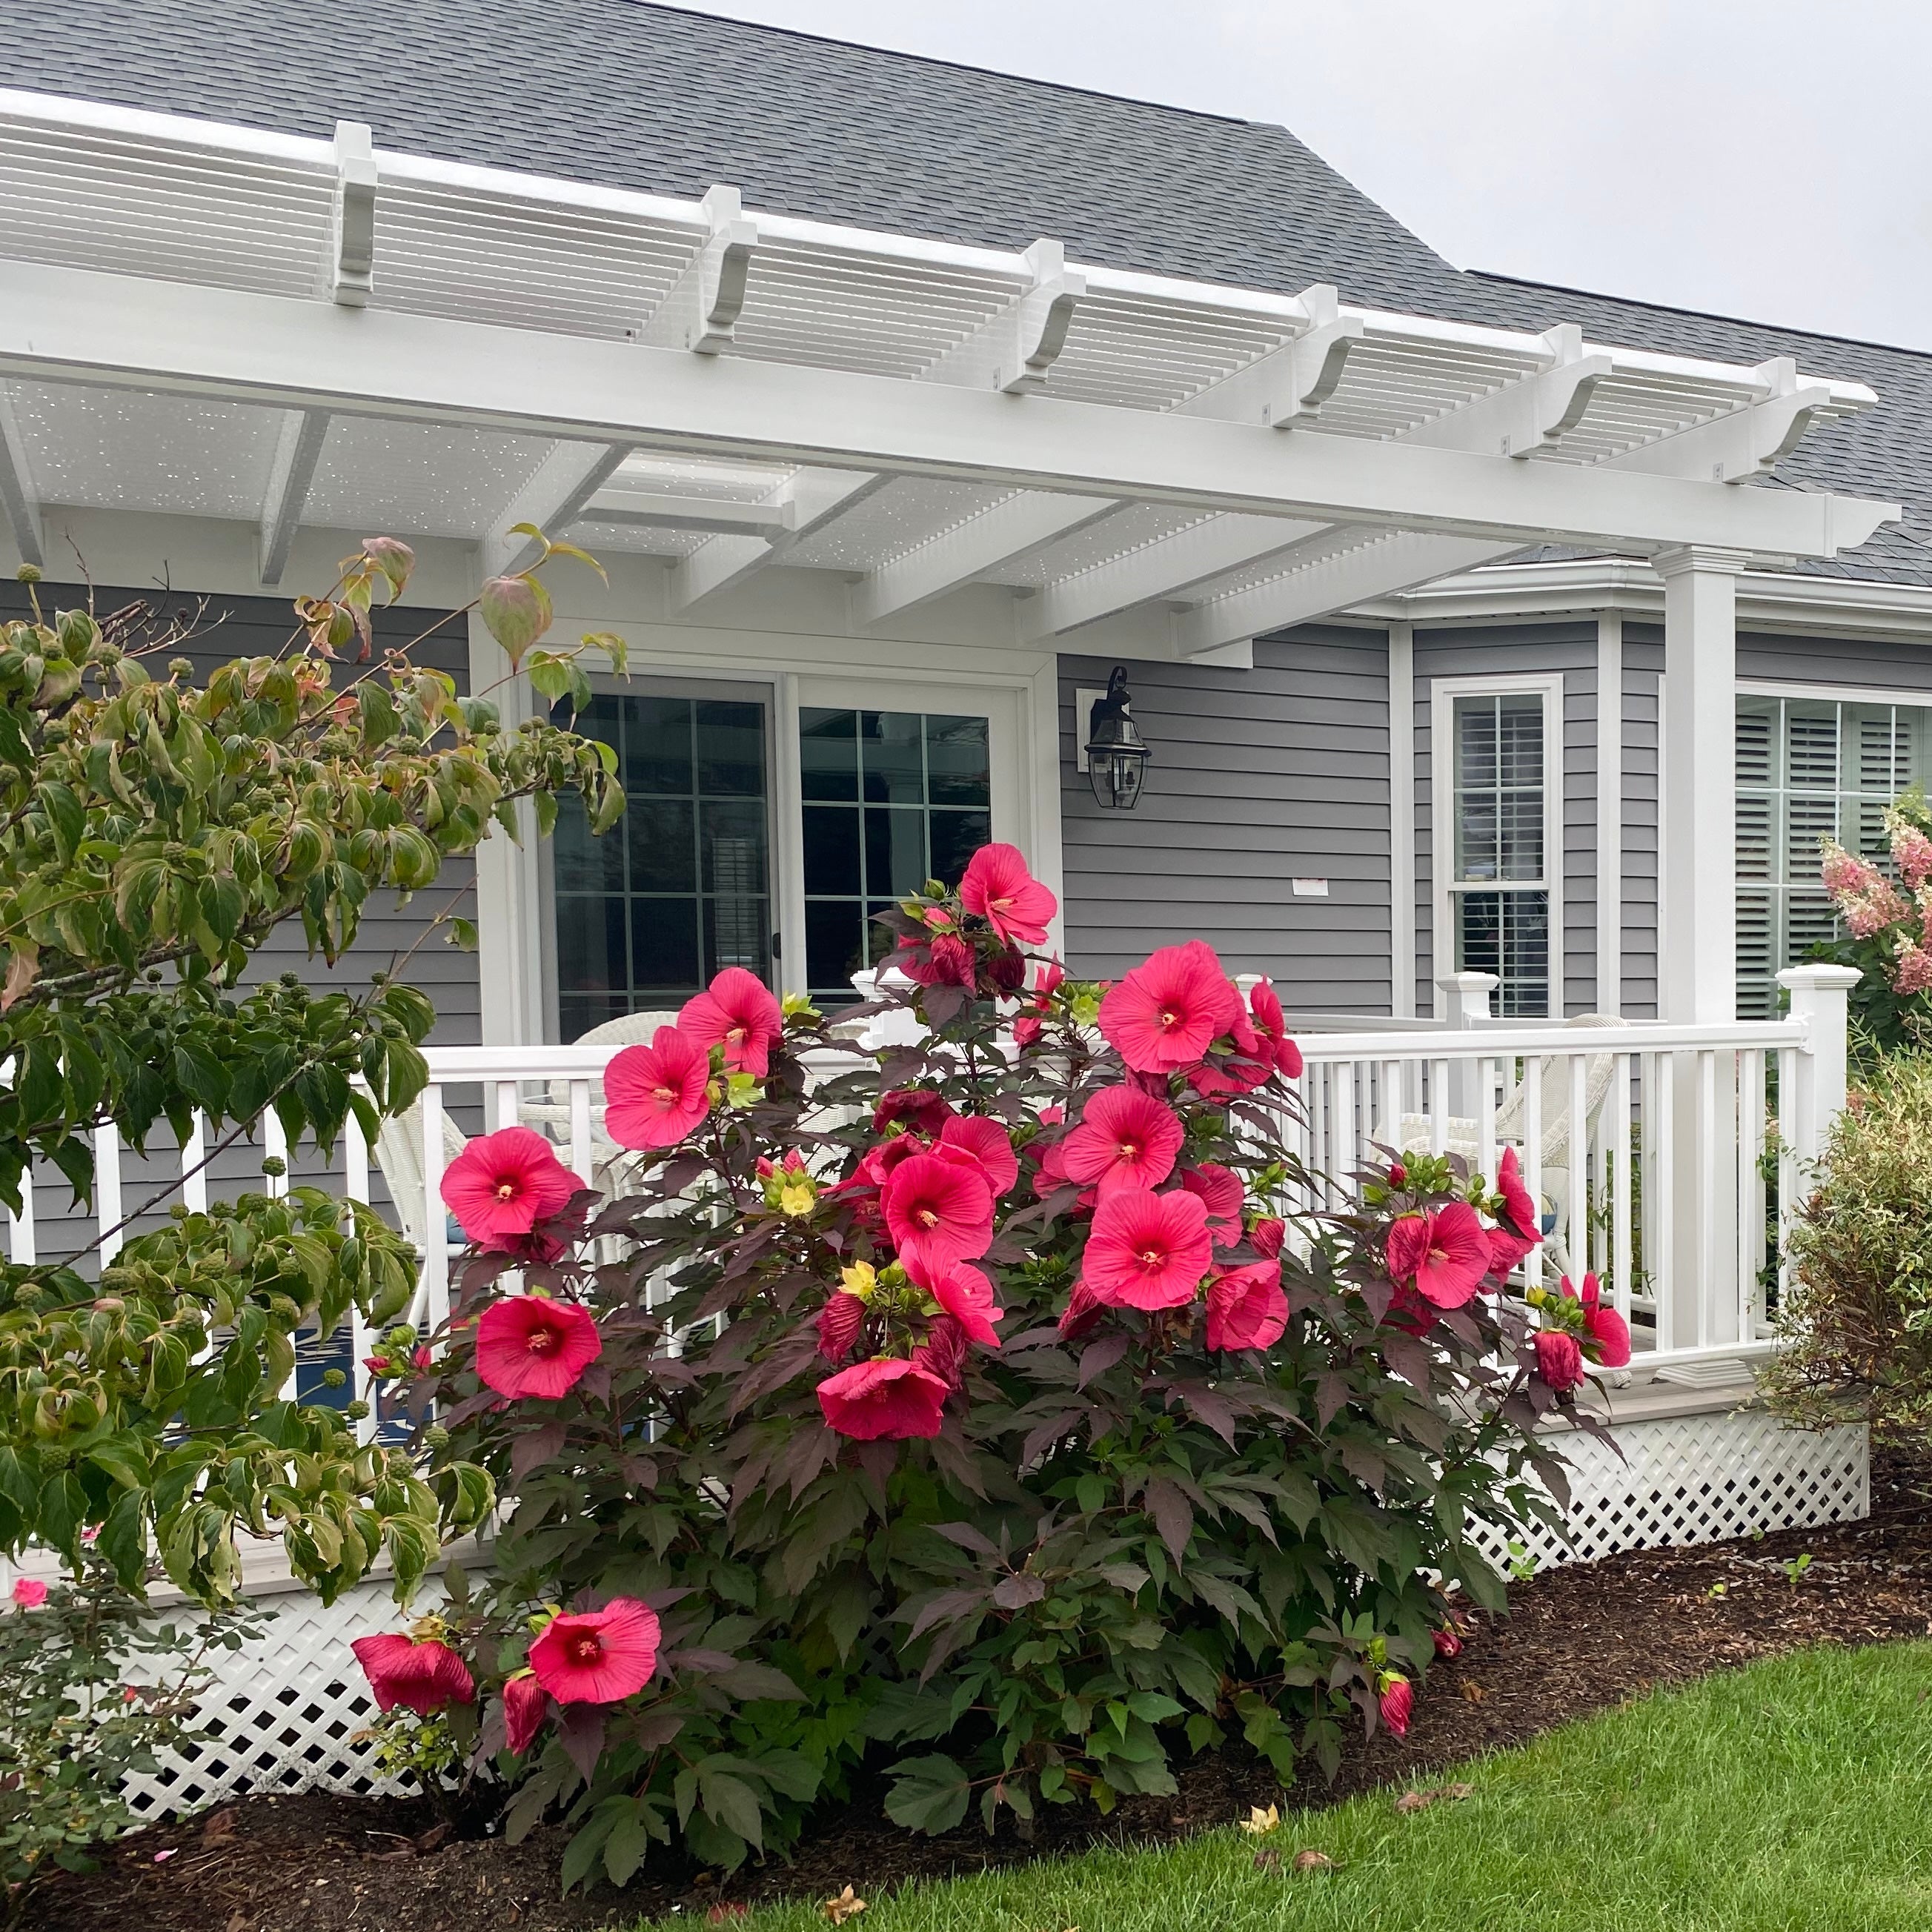 Picture of a wall-mounted 2-post pergola attached to house with beautiful flowers in the foreground